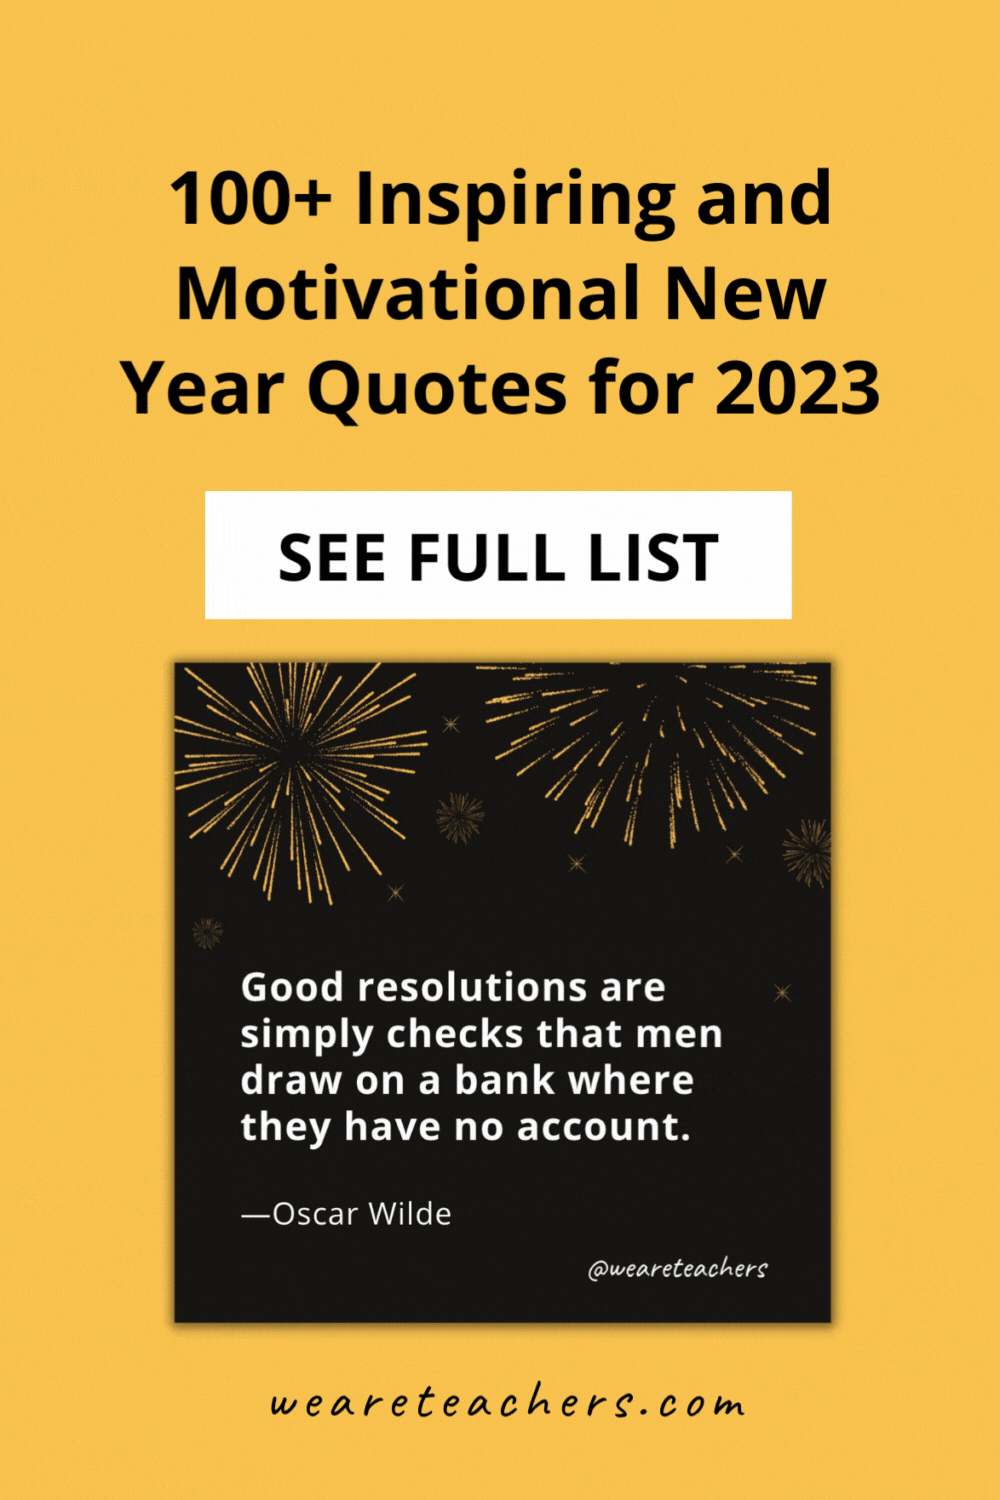 It's hard to believe that this year is coming to an end. Ready for a fresh start? Here are some New Year quotes to motivate and inspire you!